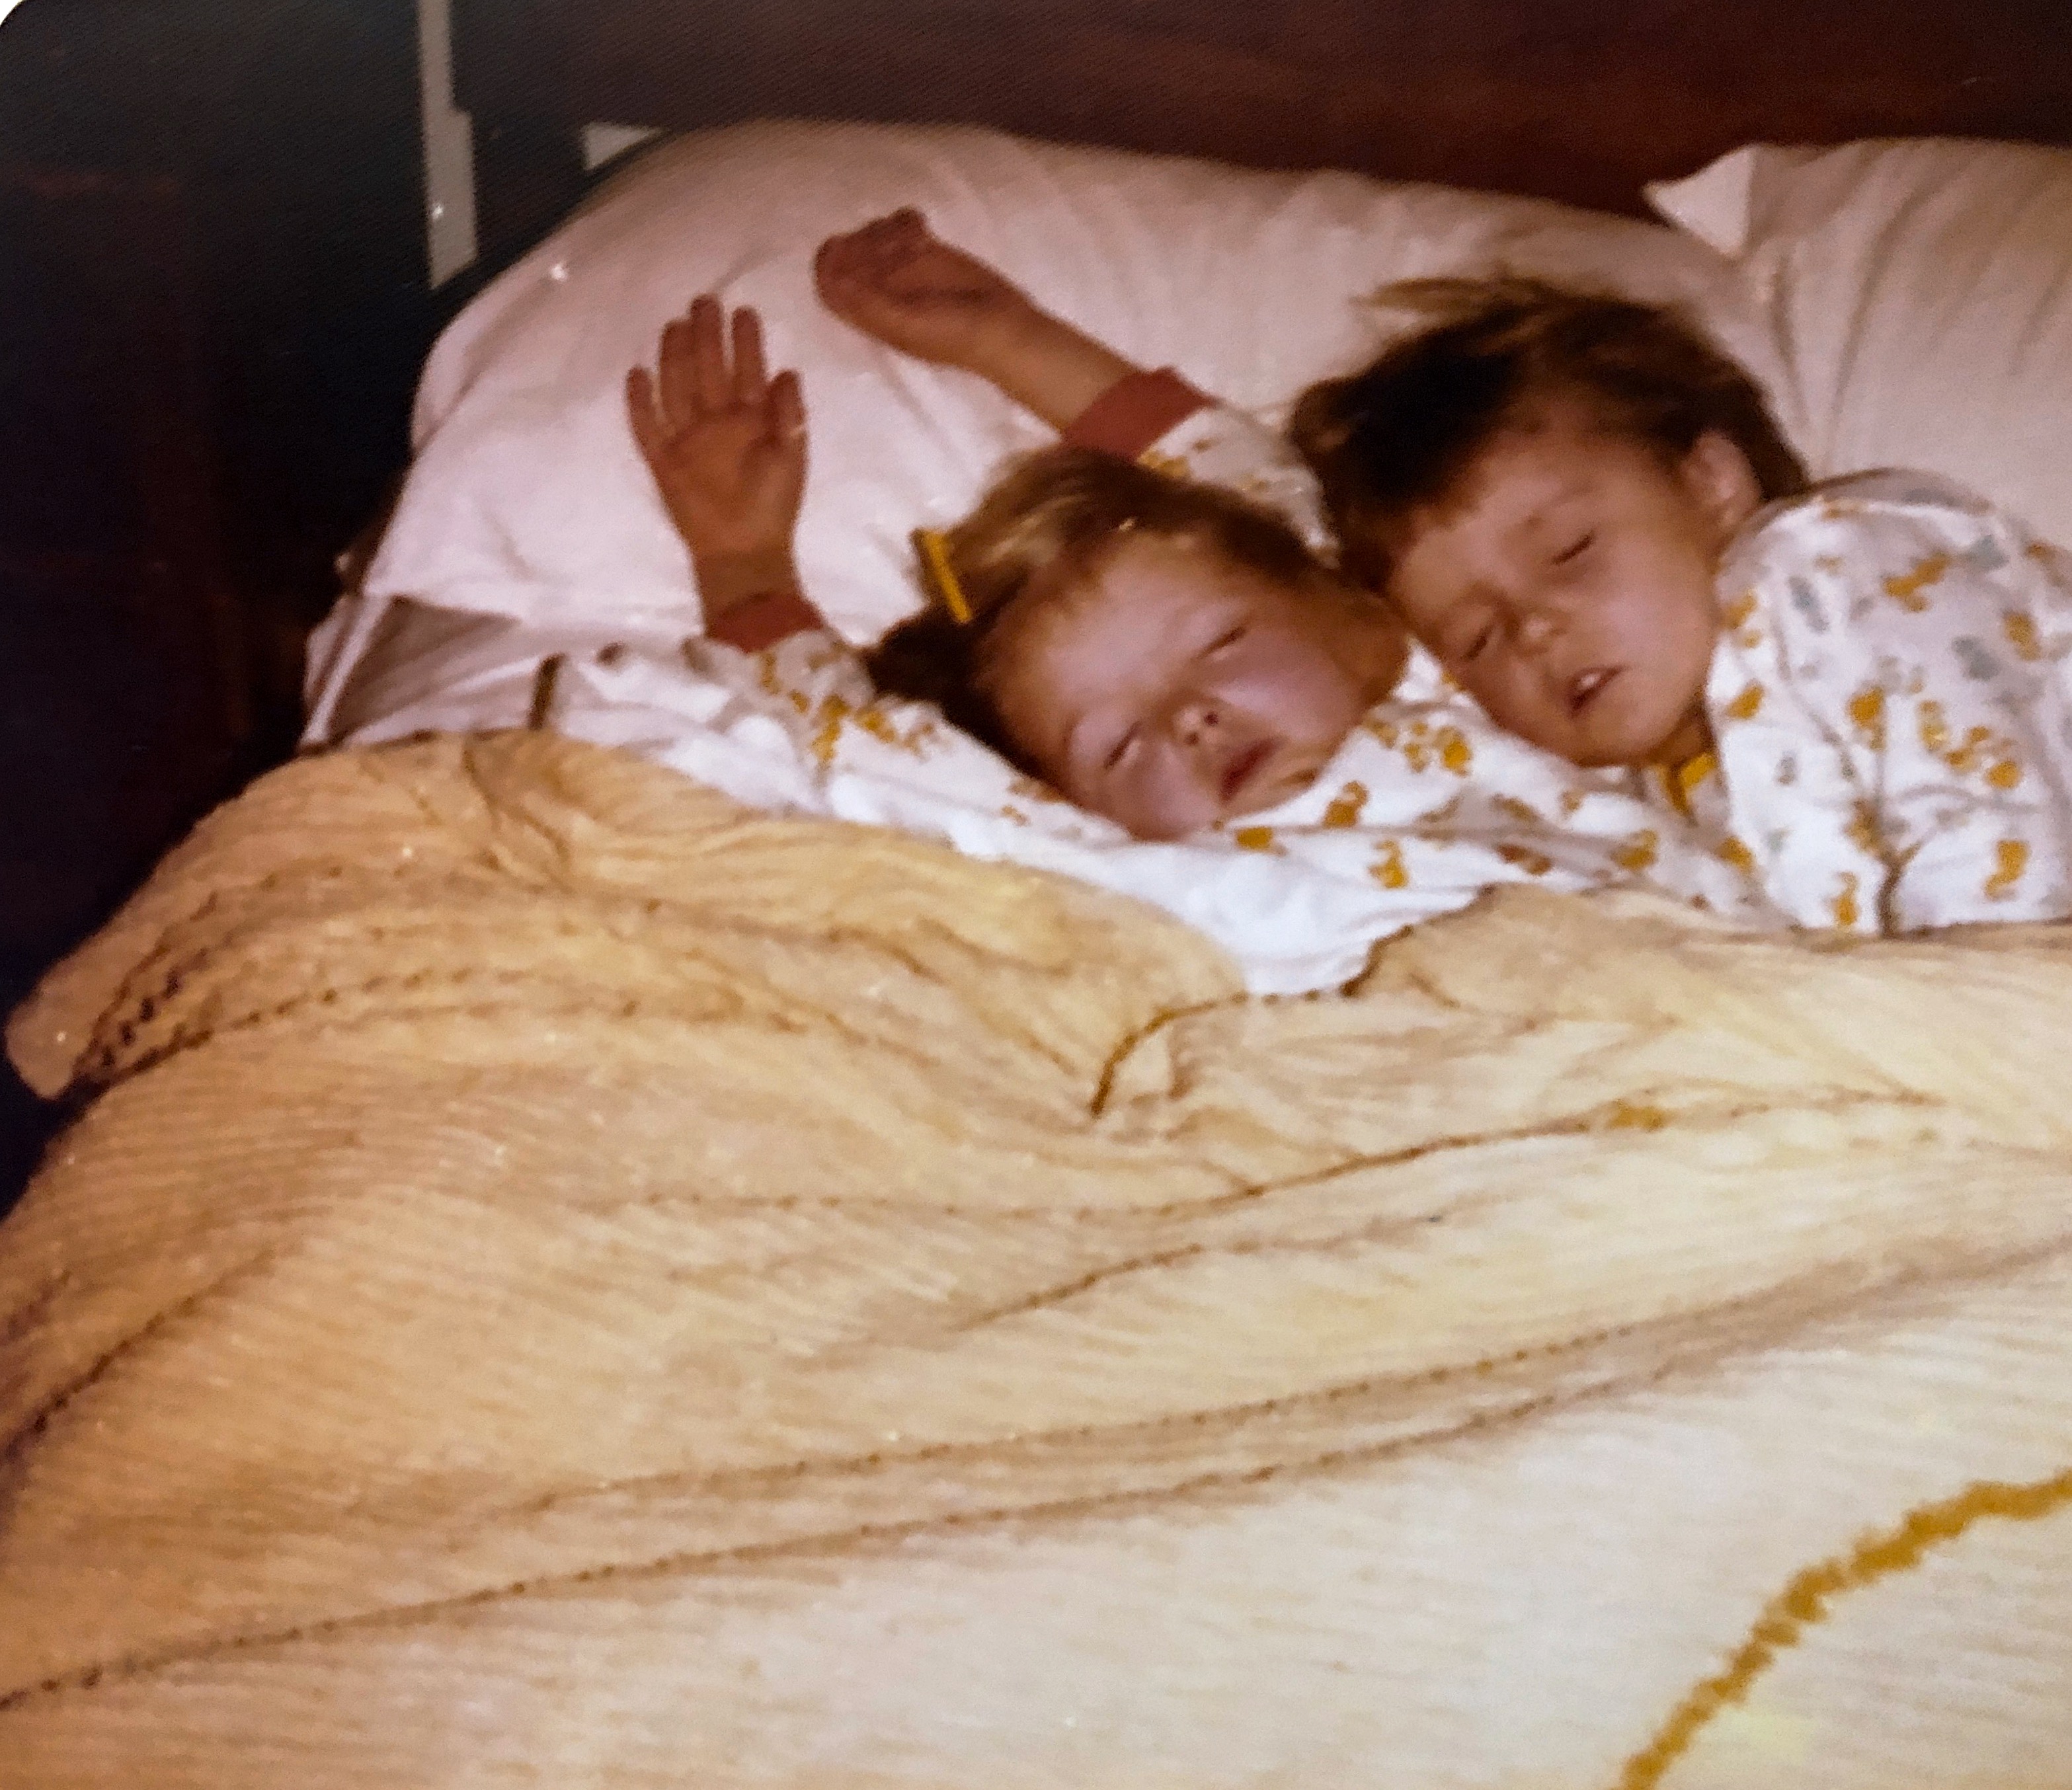 Morgan and Sharon one hour later fast asleep.
Taken 1974